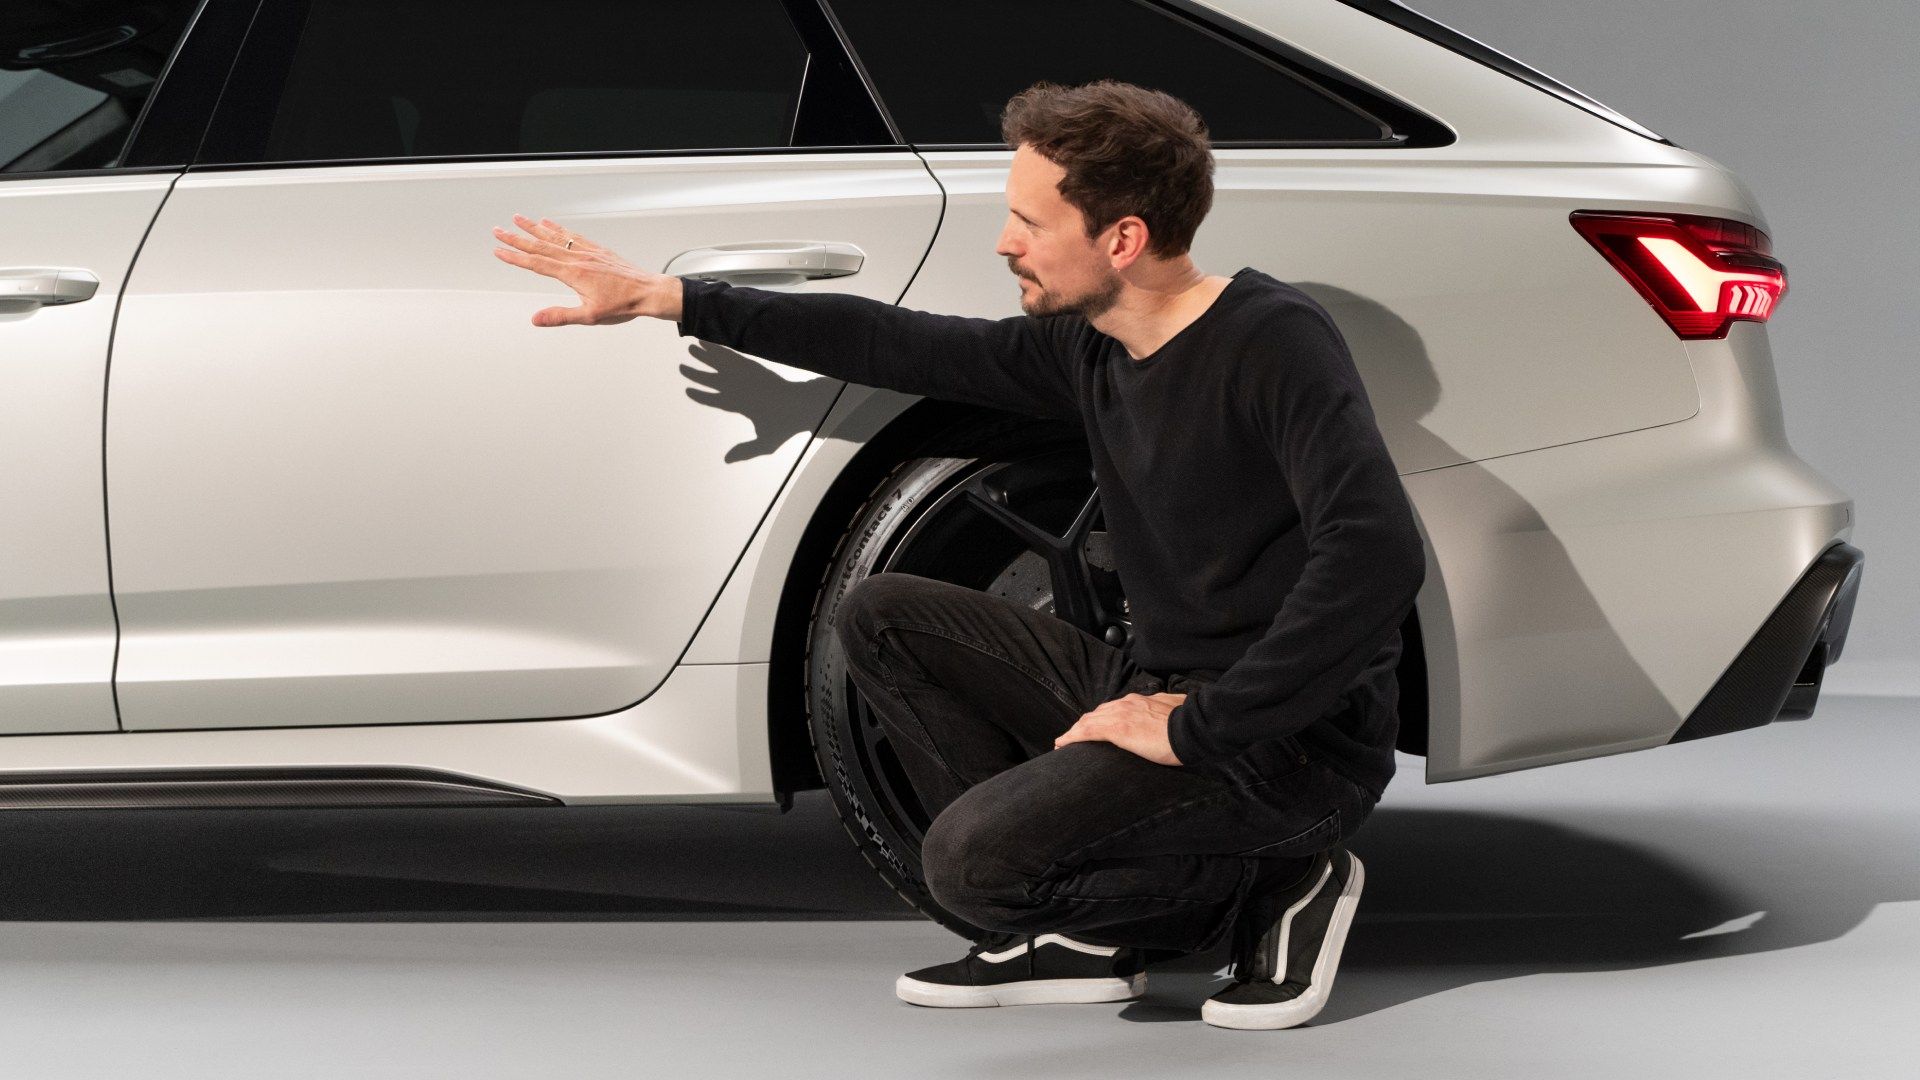 Markus Eberle crouching at the side of the Audi RS 6 Avant performance, pointing his hand to the rear door.